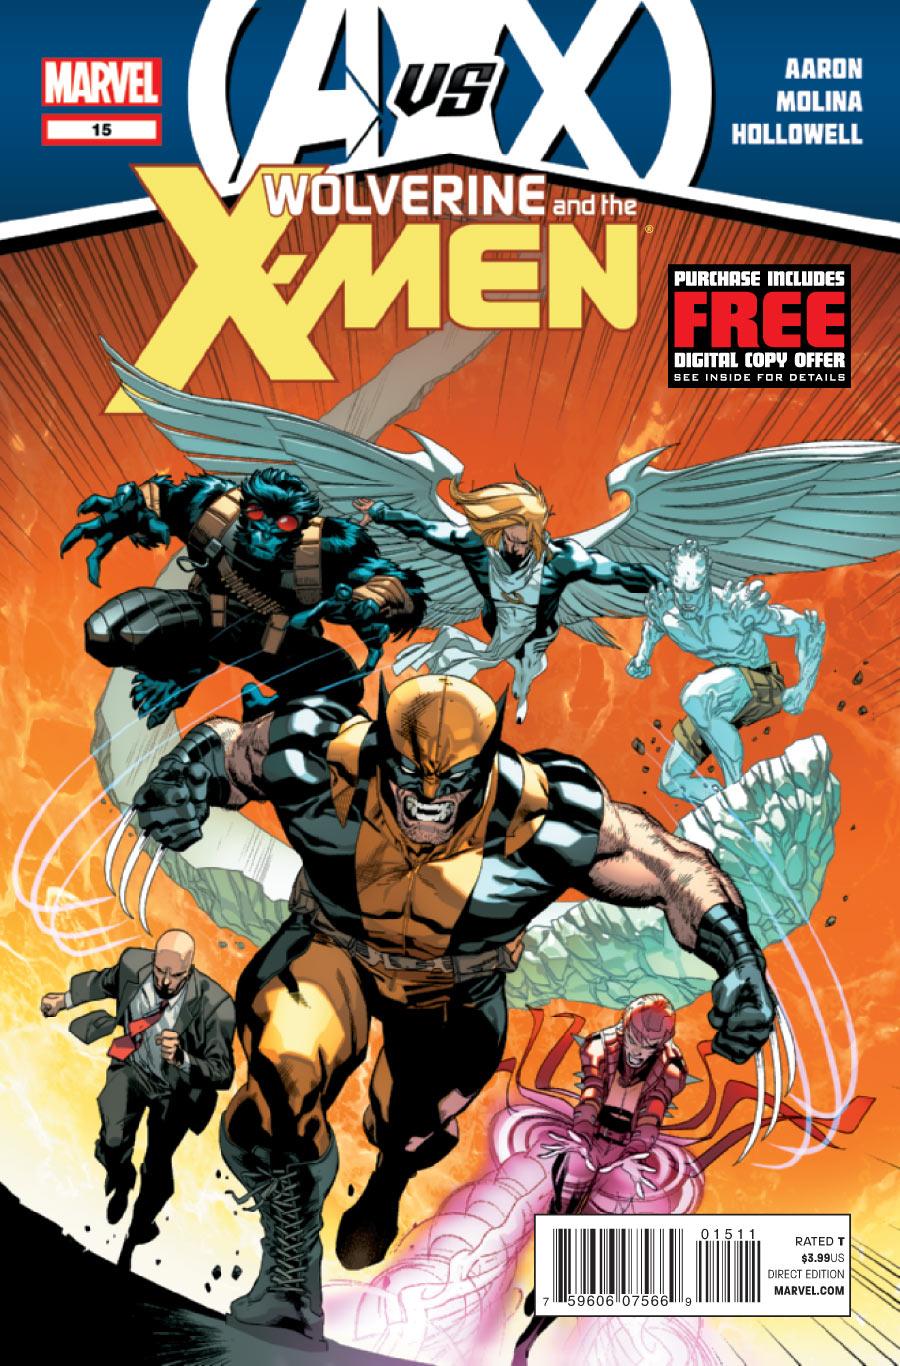 Wolverine and the X-Men Vol. 1 #15